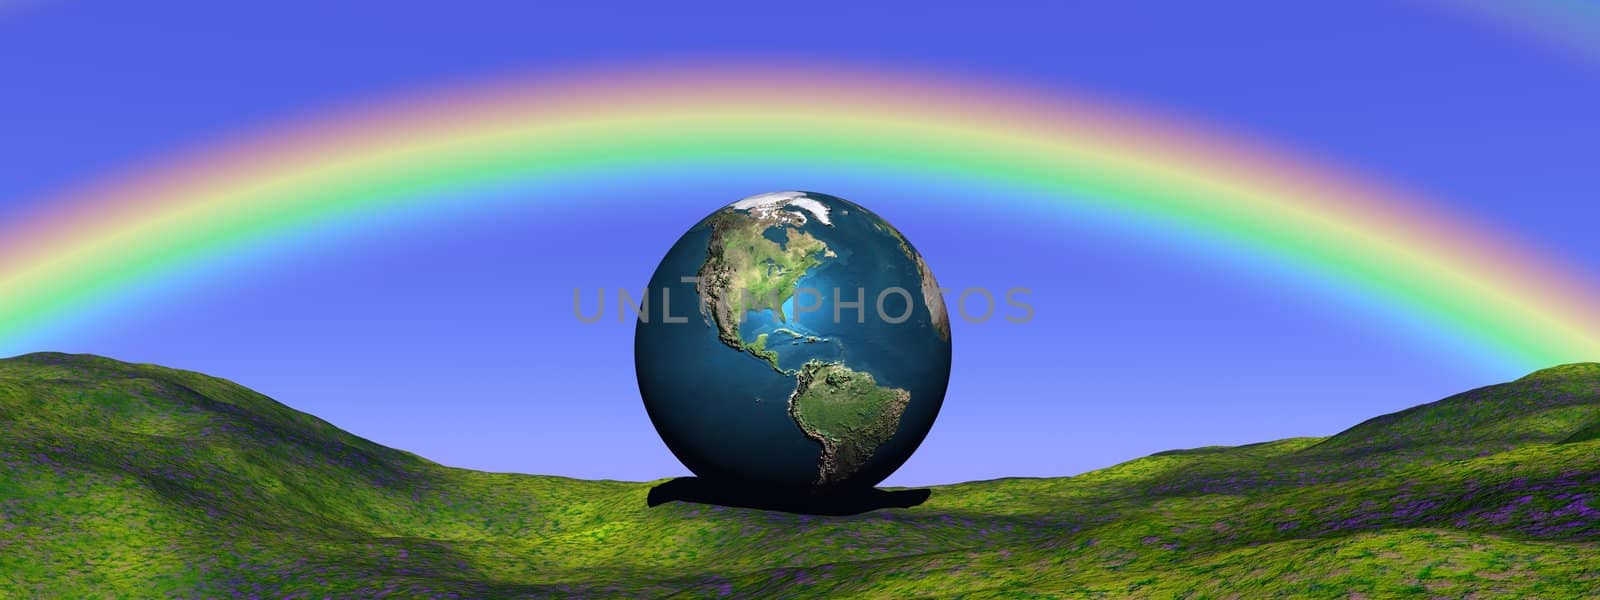 Earth planet on a green grass hill and under a beautiful rainbow